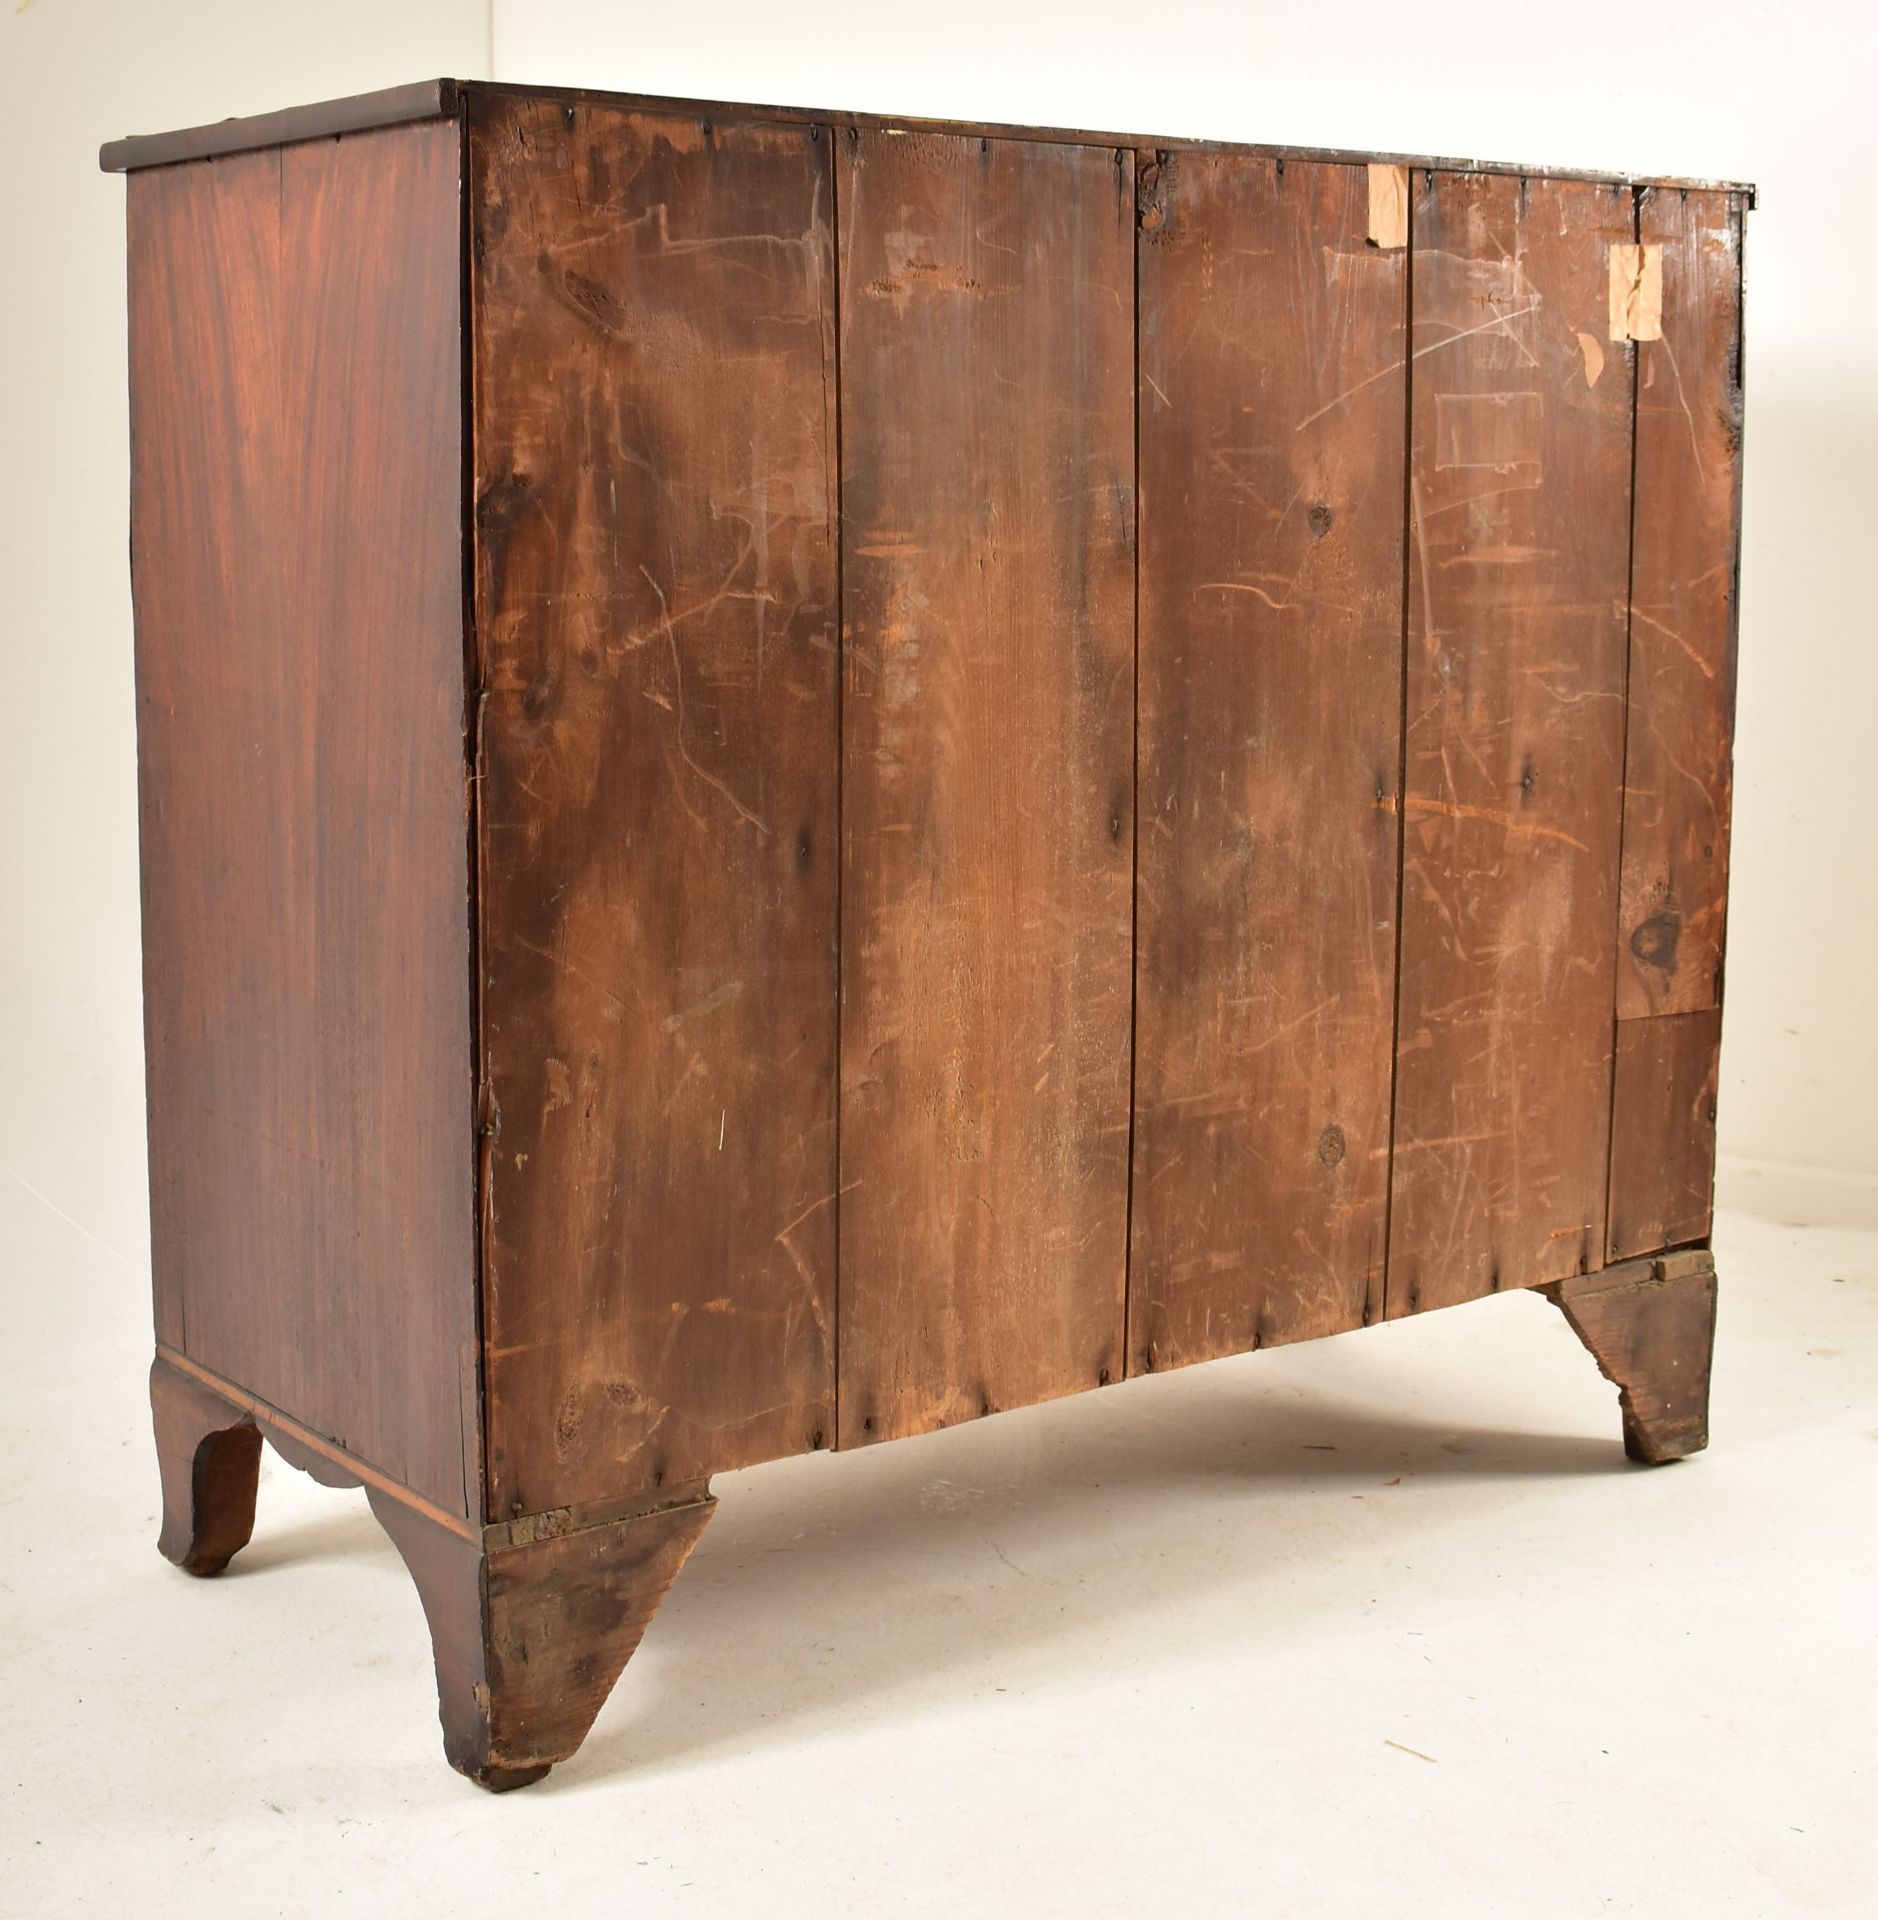 GEORGE III 19TH CENTURY MAHOGANY CHEST OF DRAWERS - Image 9 of 9